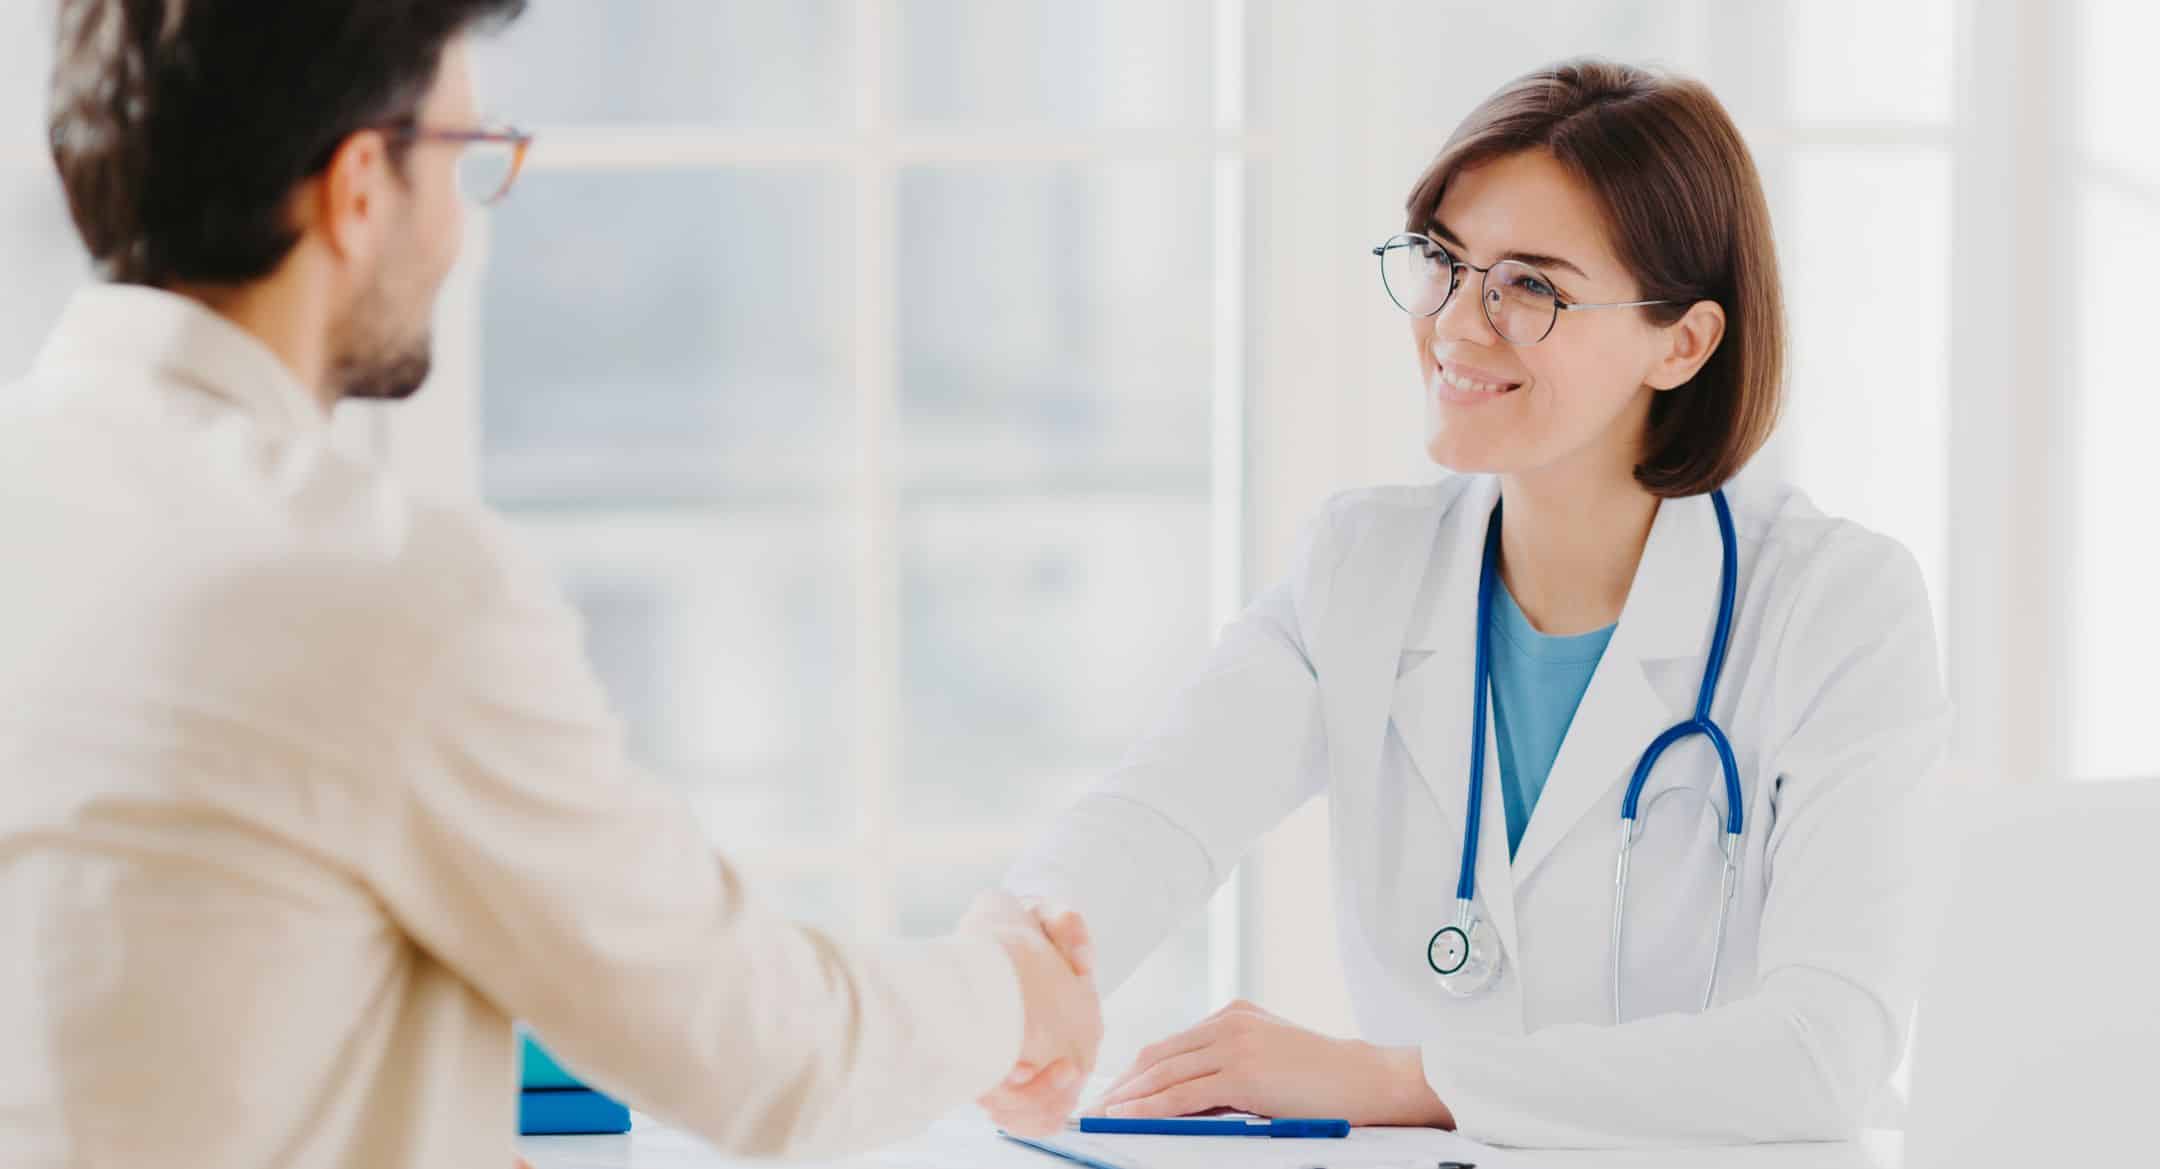 Friendly female doctor greets patient with handshake, pose in private clinic